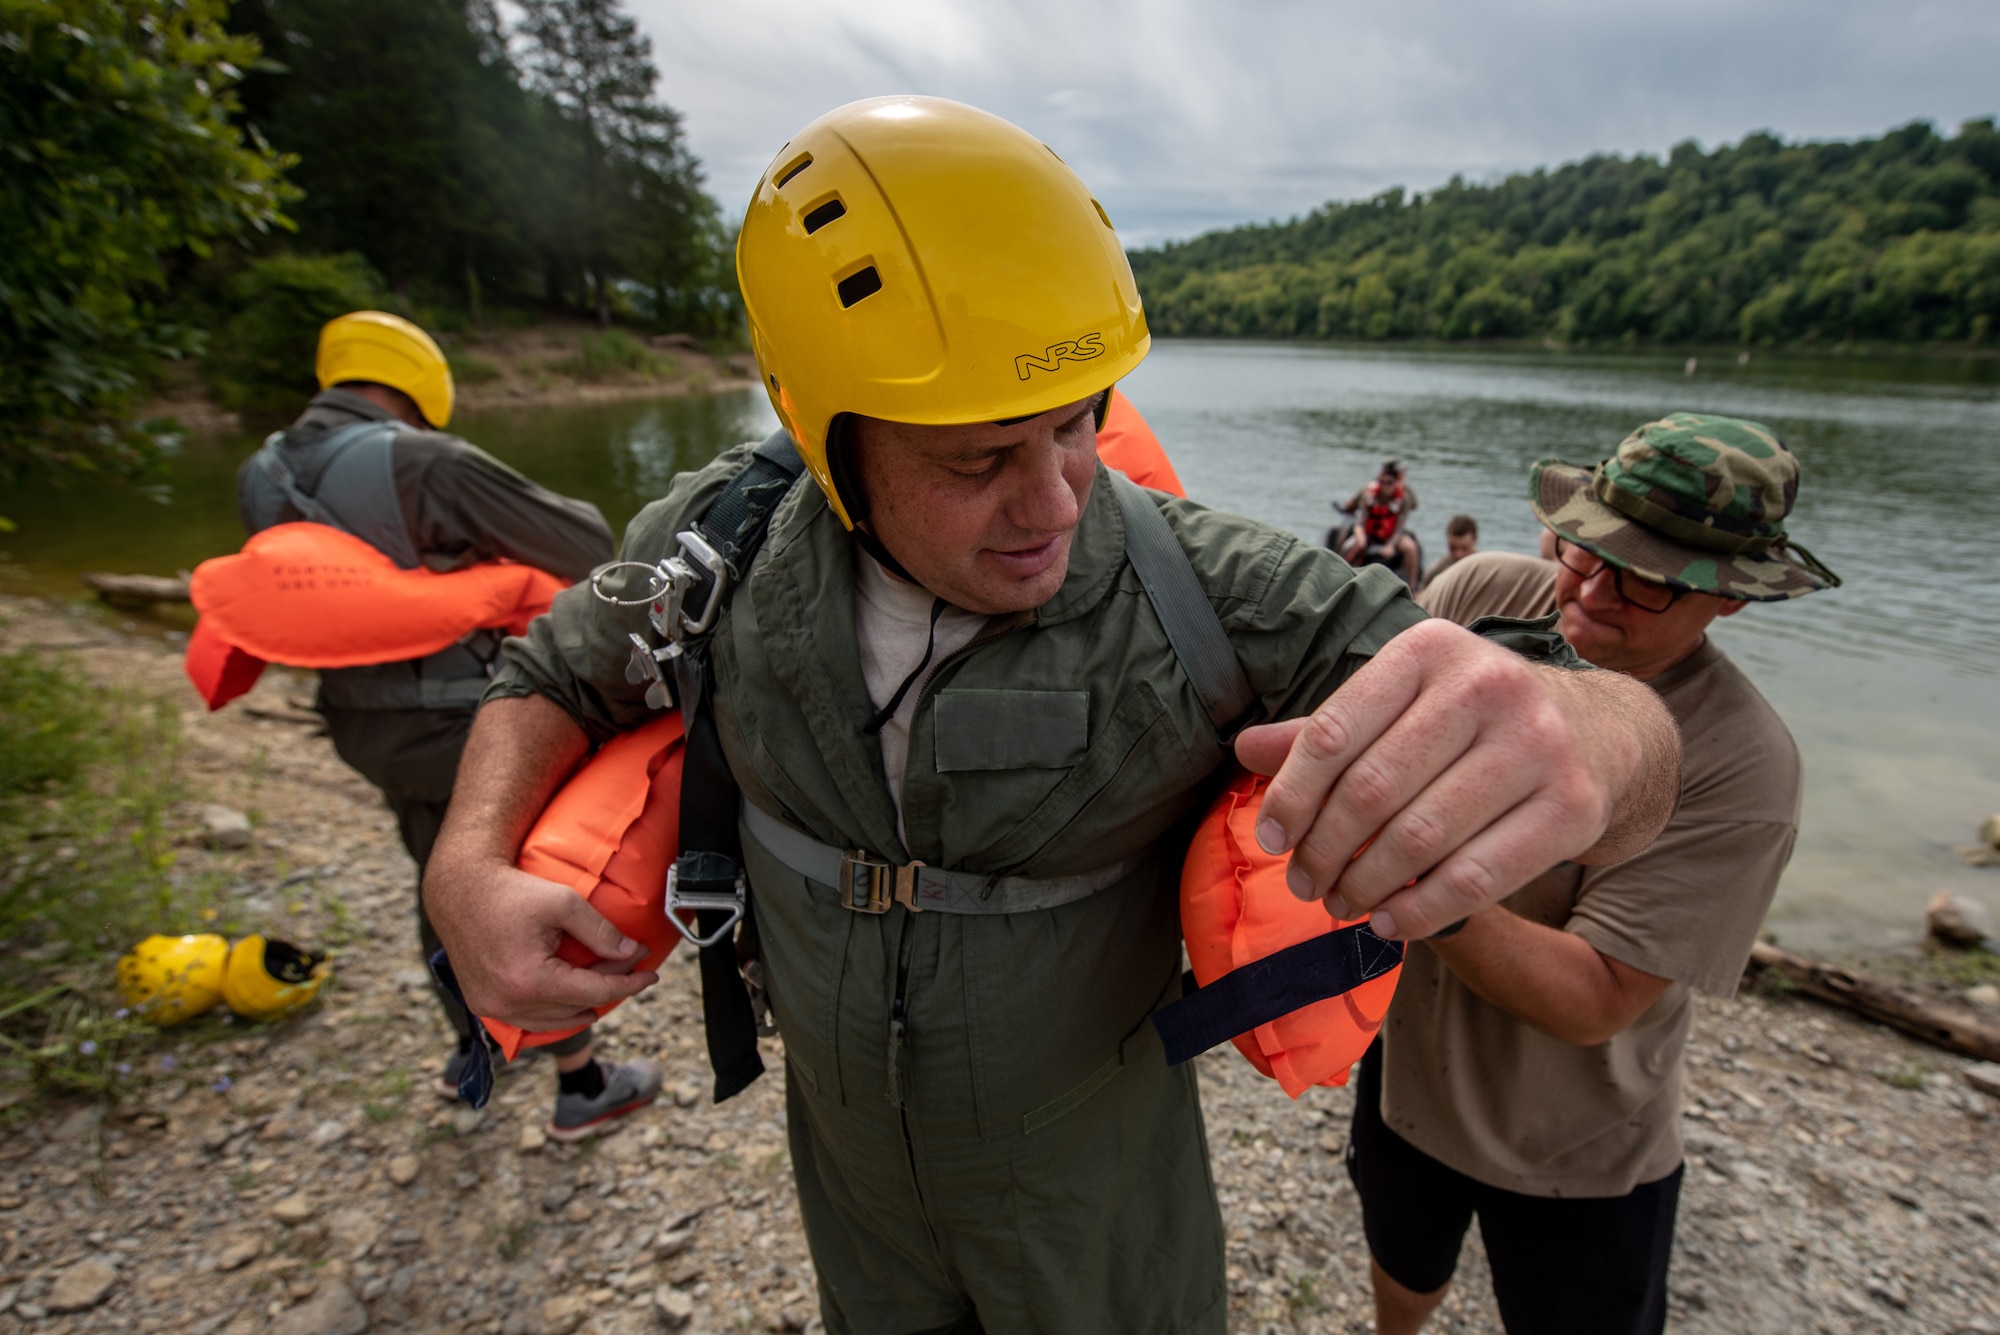 Maj. Andrew Hutchinson, a pilot for the Kentucky Air National Guard’s 165th Airlift Squadron, is donned with a parachute harness in preparation for a parachute drag during water survival training at Taylorsville Lake in Spencer County, Ky., Sept. 10, 2022. The annual training refreshes aircrew members on skills learned during U.S. Air Force Survival School. (U.S. Air National Guard photo by Tech. Sgt. Joshua Horton)